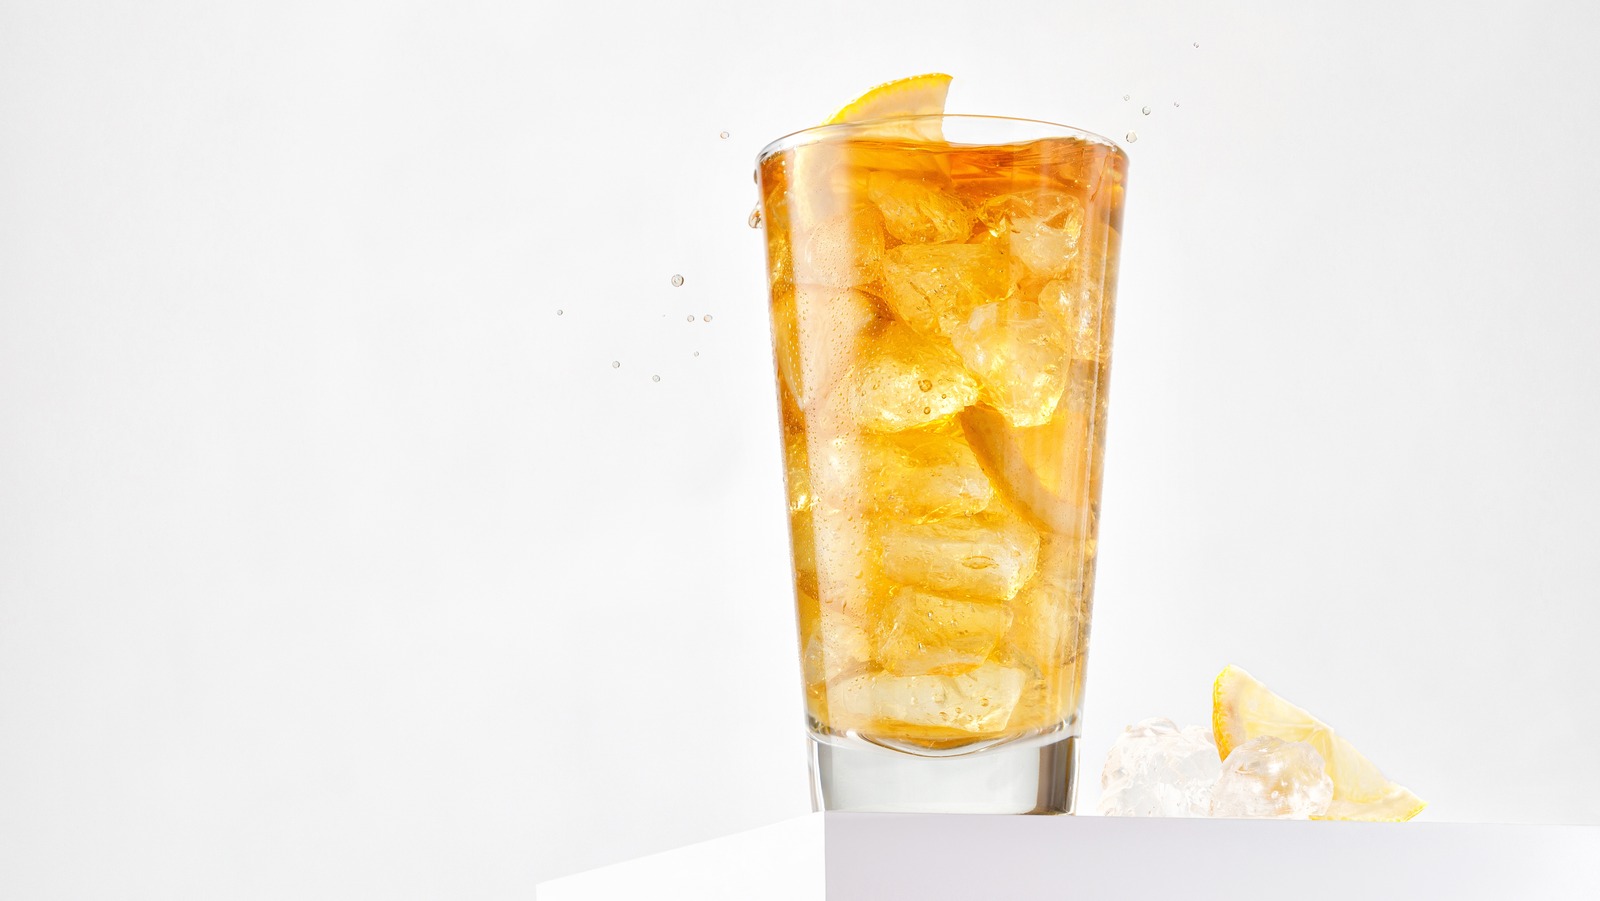 https://www.tastingtable.com/img/gallery/just-ice-tea-unveiled-its-first-flavor-and-plans-for-the-future/l-intro-1660679999.jpg